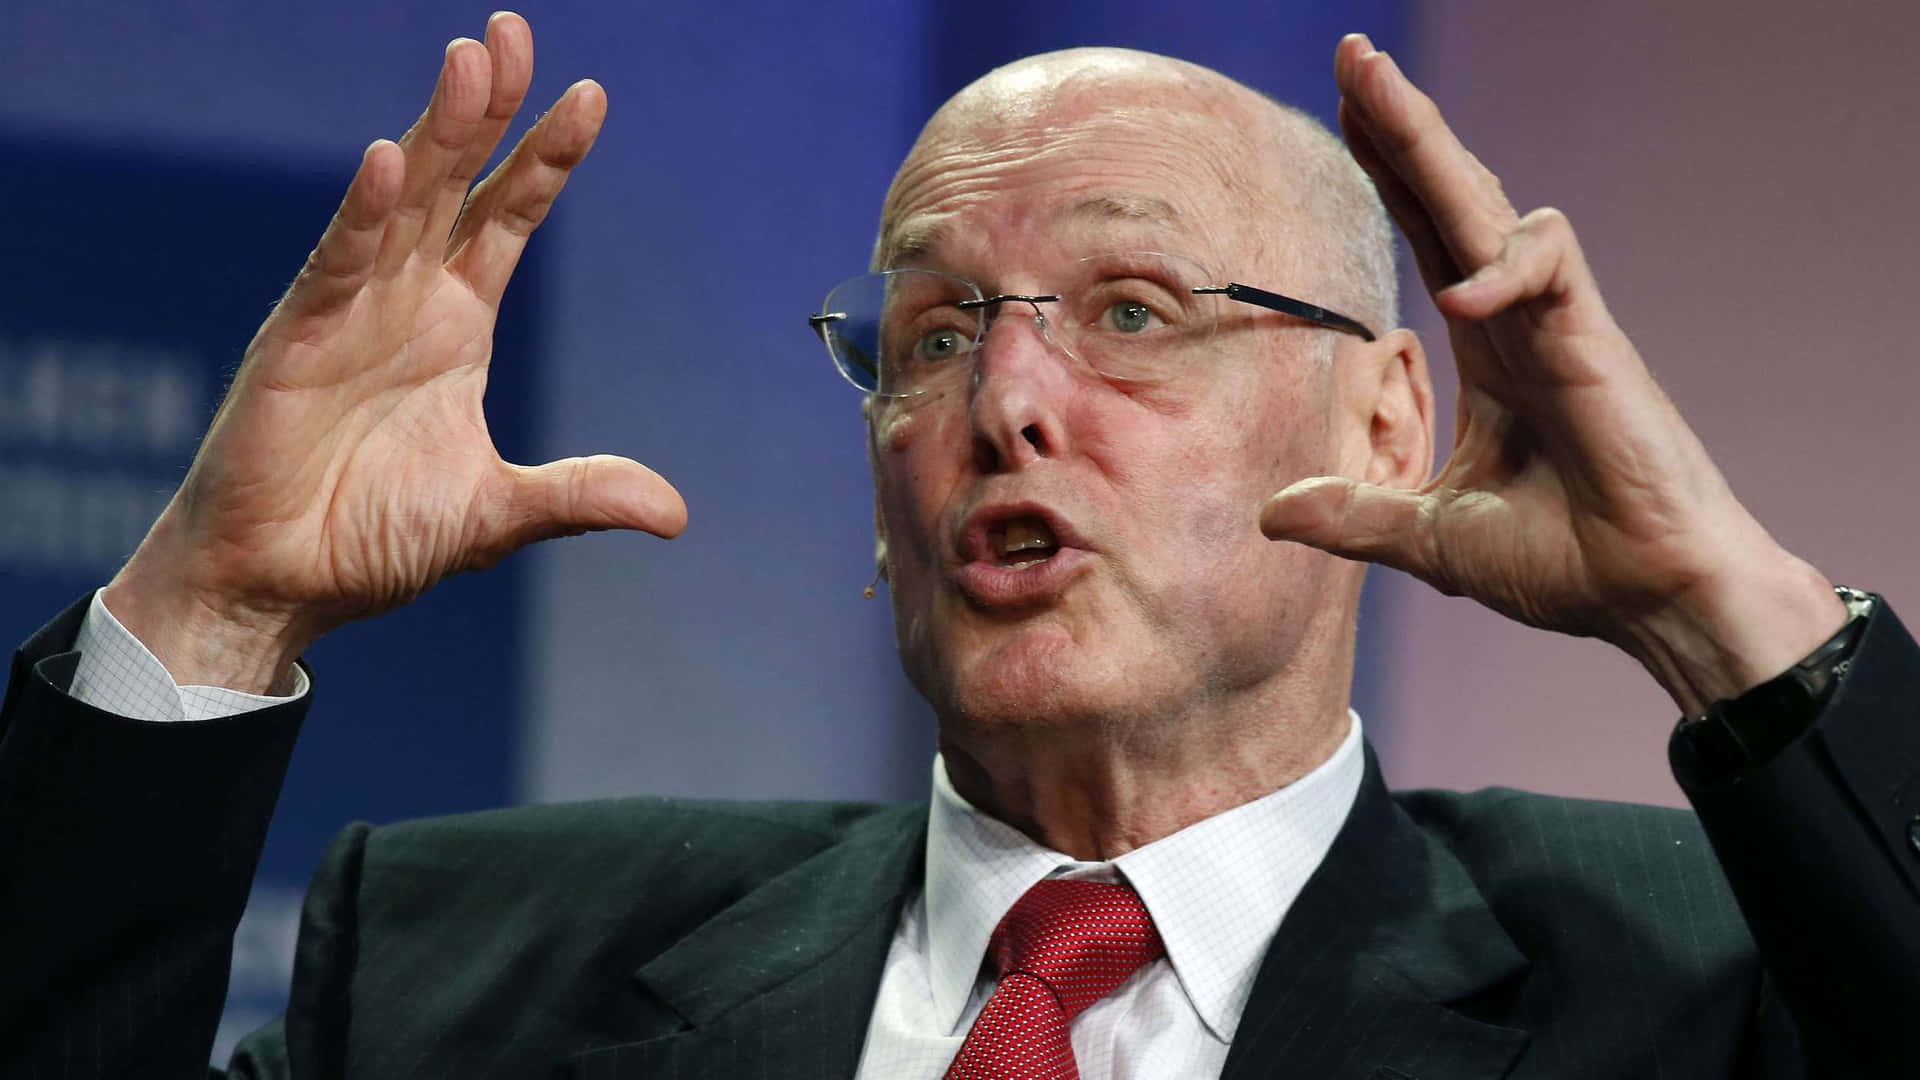 Henry Paulson Animatedly Gesturing During a Speech Wallpaper